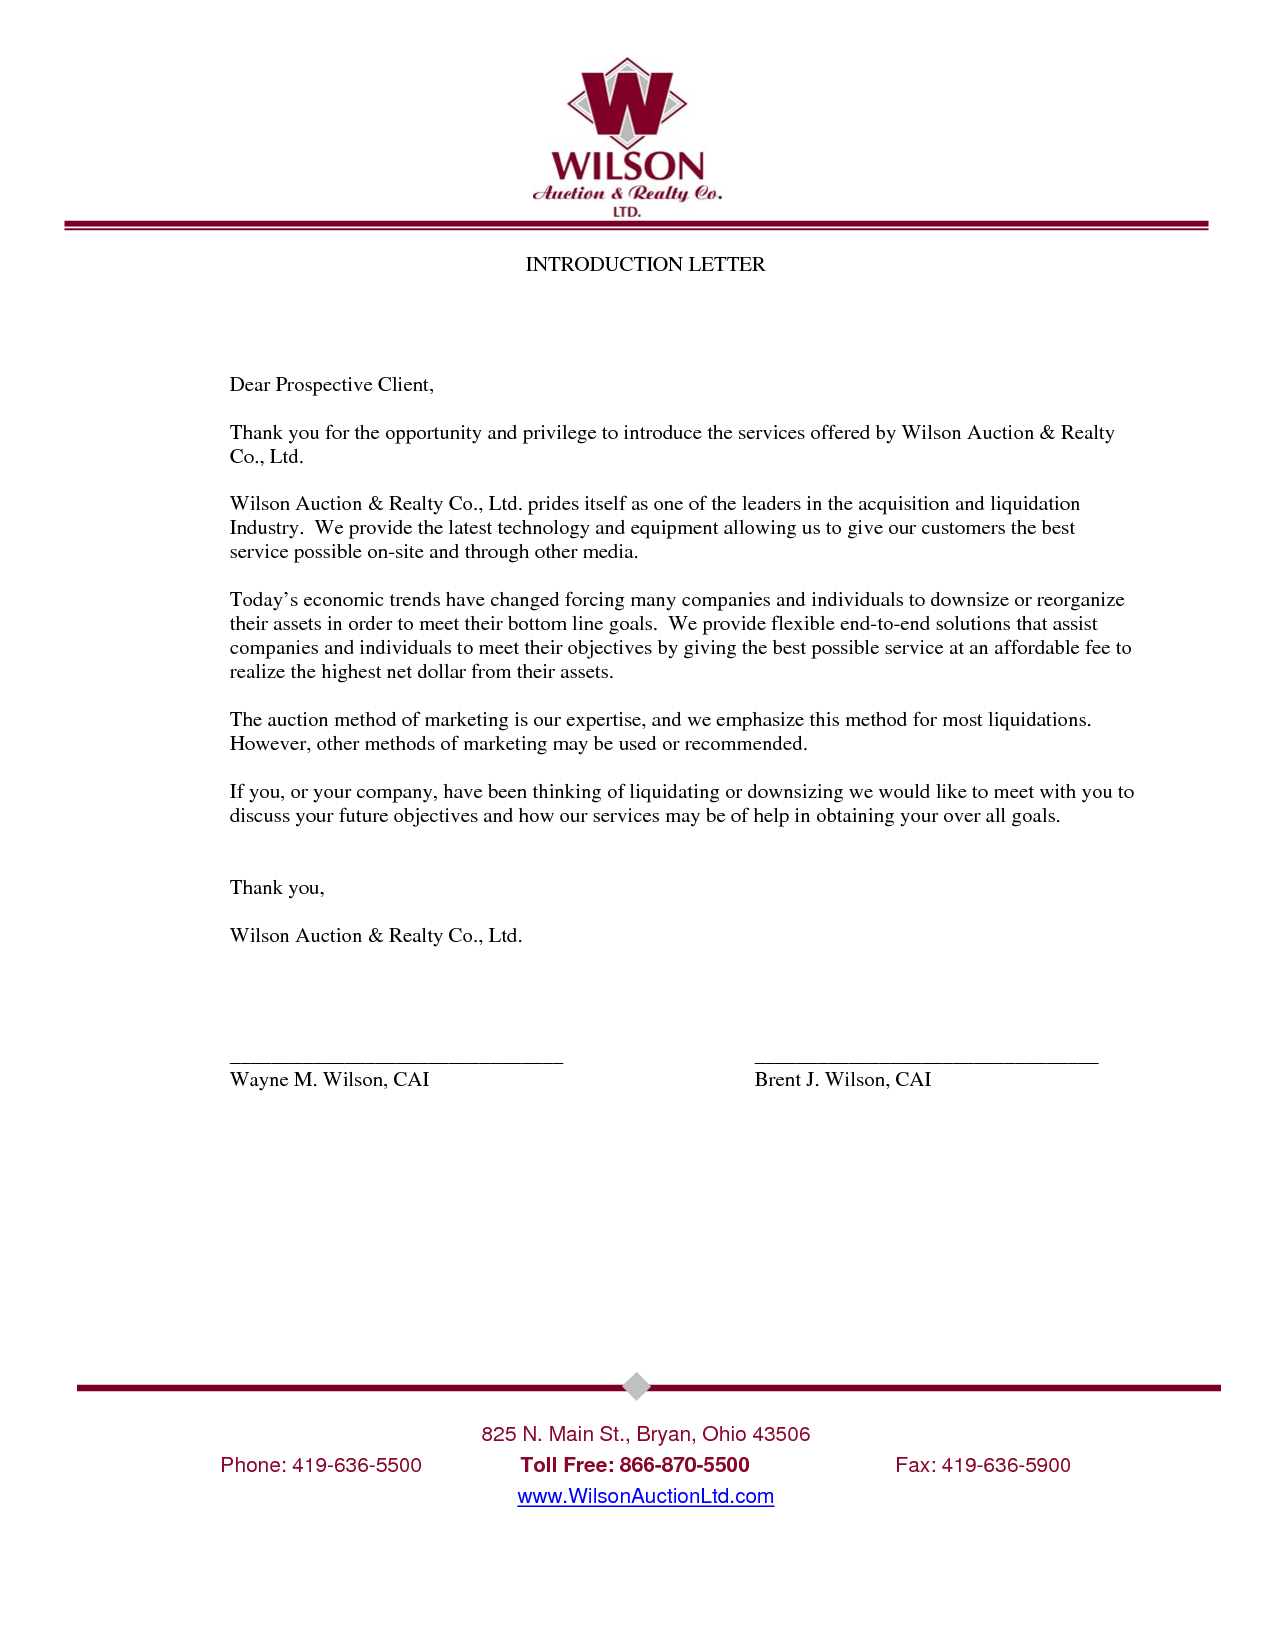 Business Introduction Letter Sample Scrumps